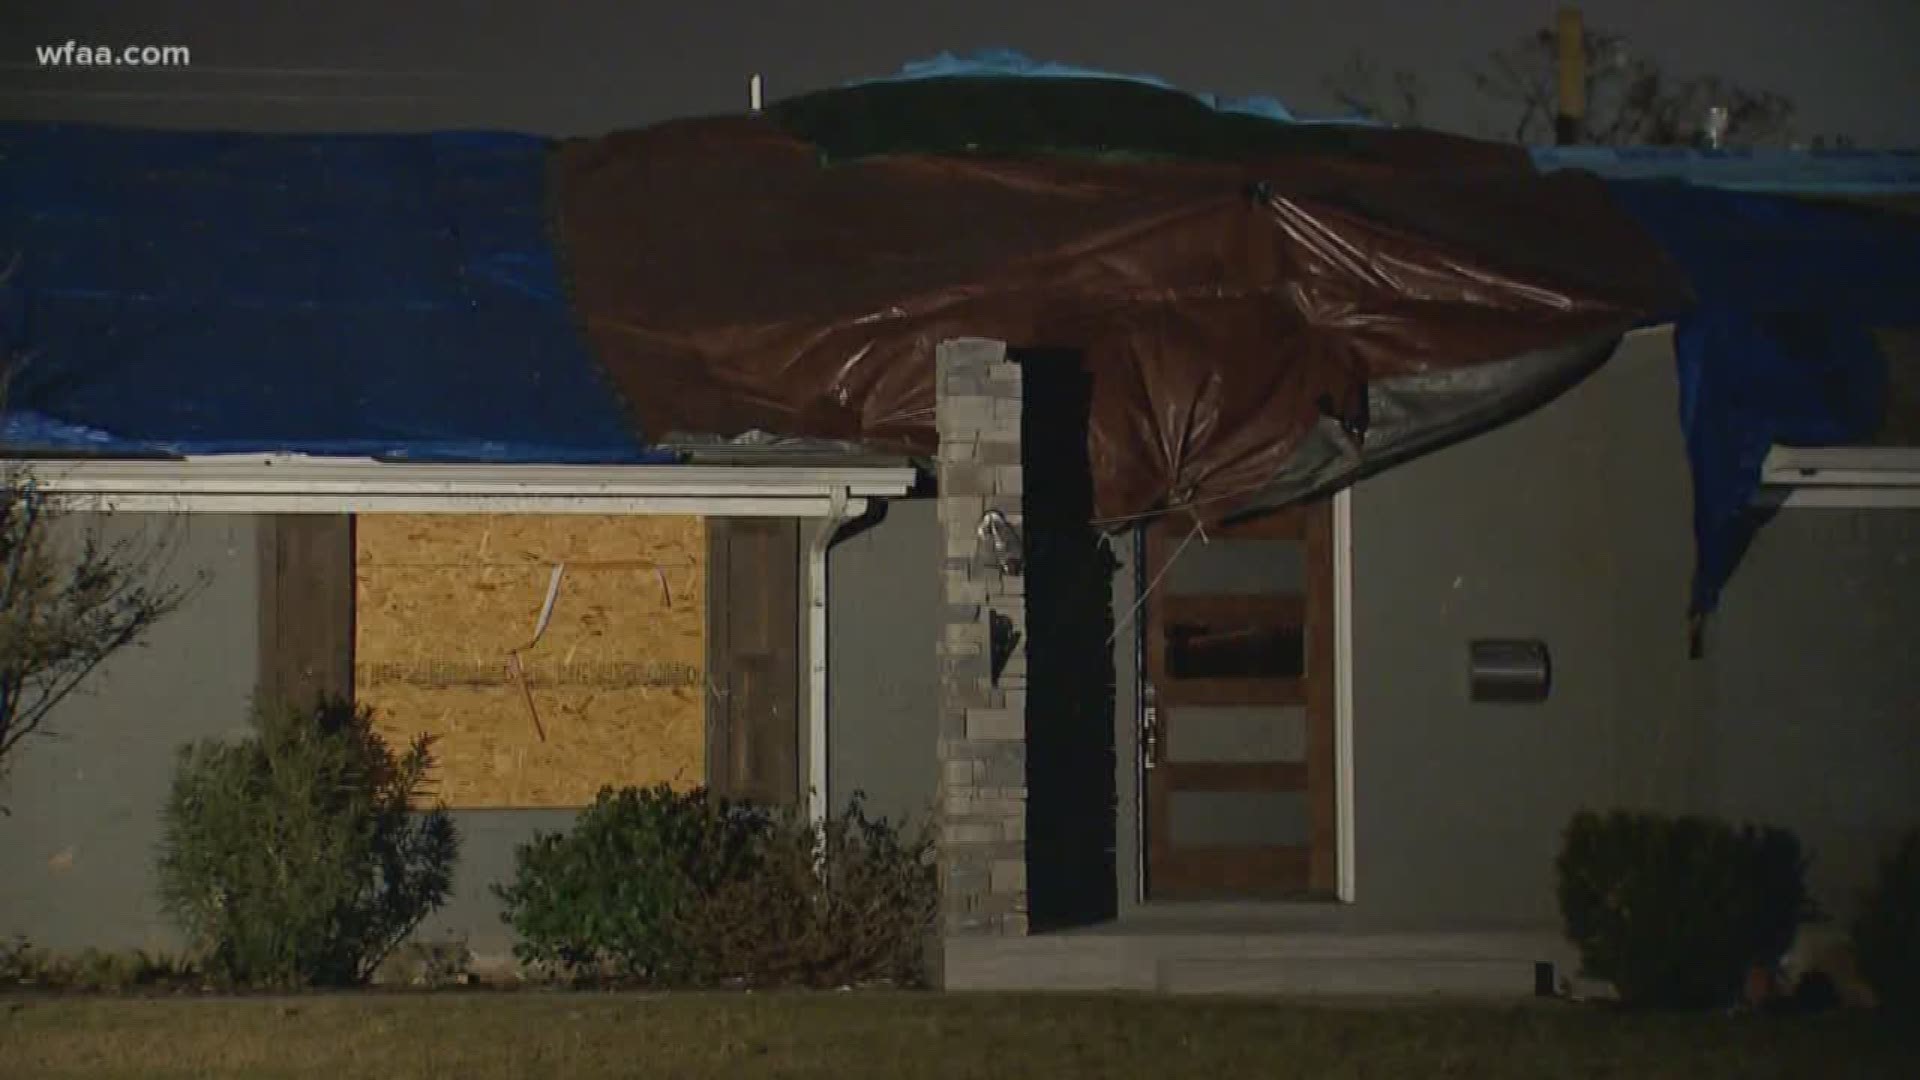 The Dallas County District Attorney announced it's upping the penalties for anyone caught stealing from homes and buildings hit by storms.